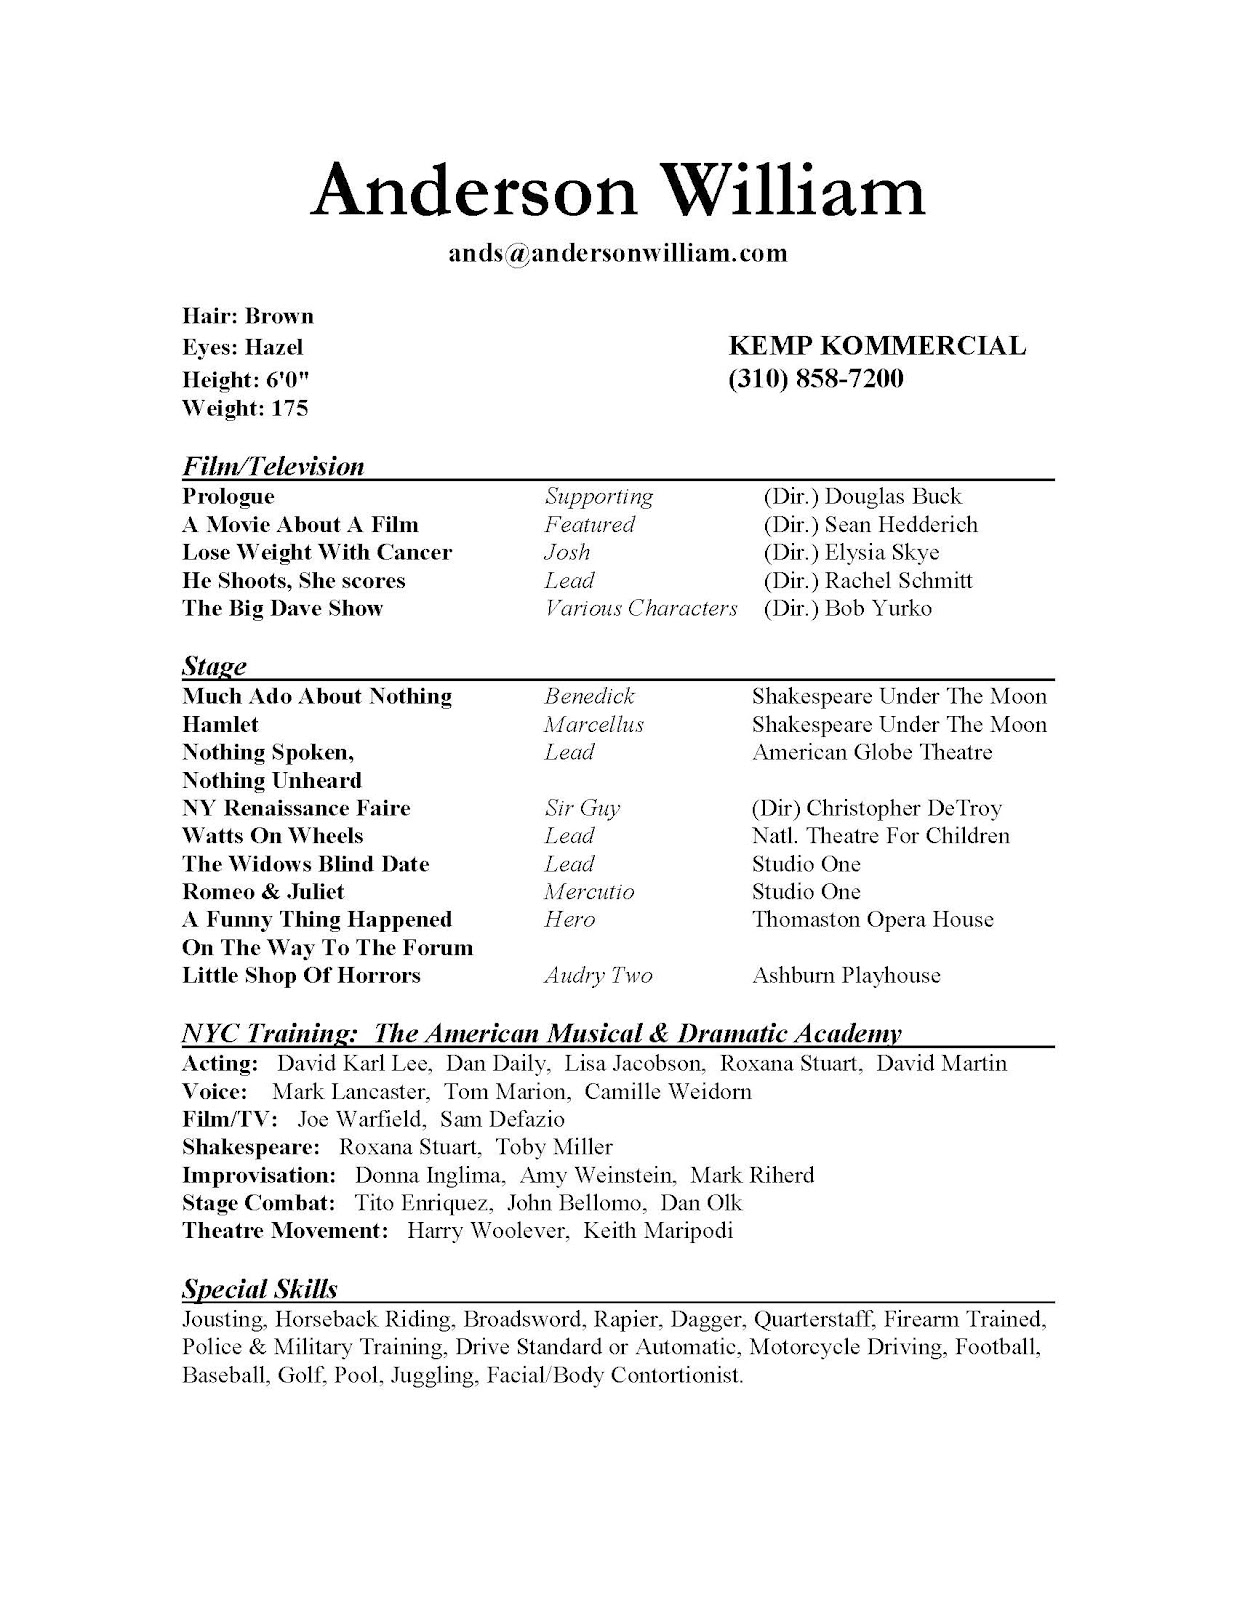 Now a few Theatre Resume samples: